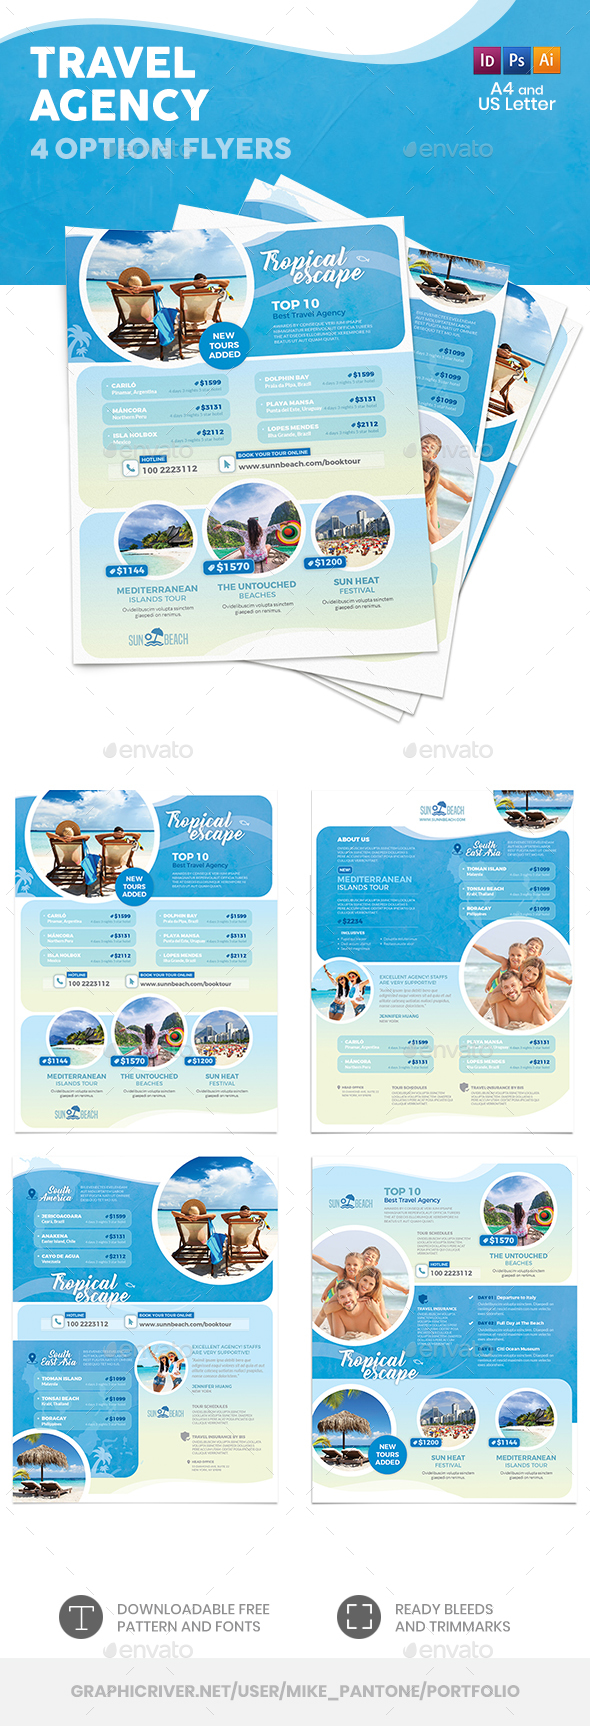 Travel Agency Flyers 5 – 4 Options